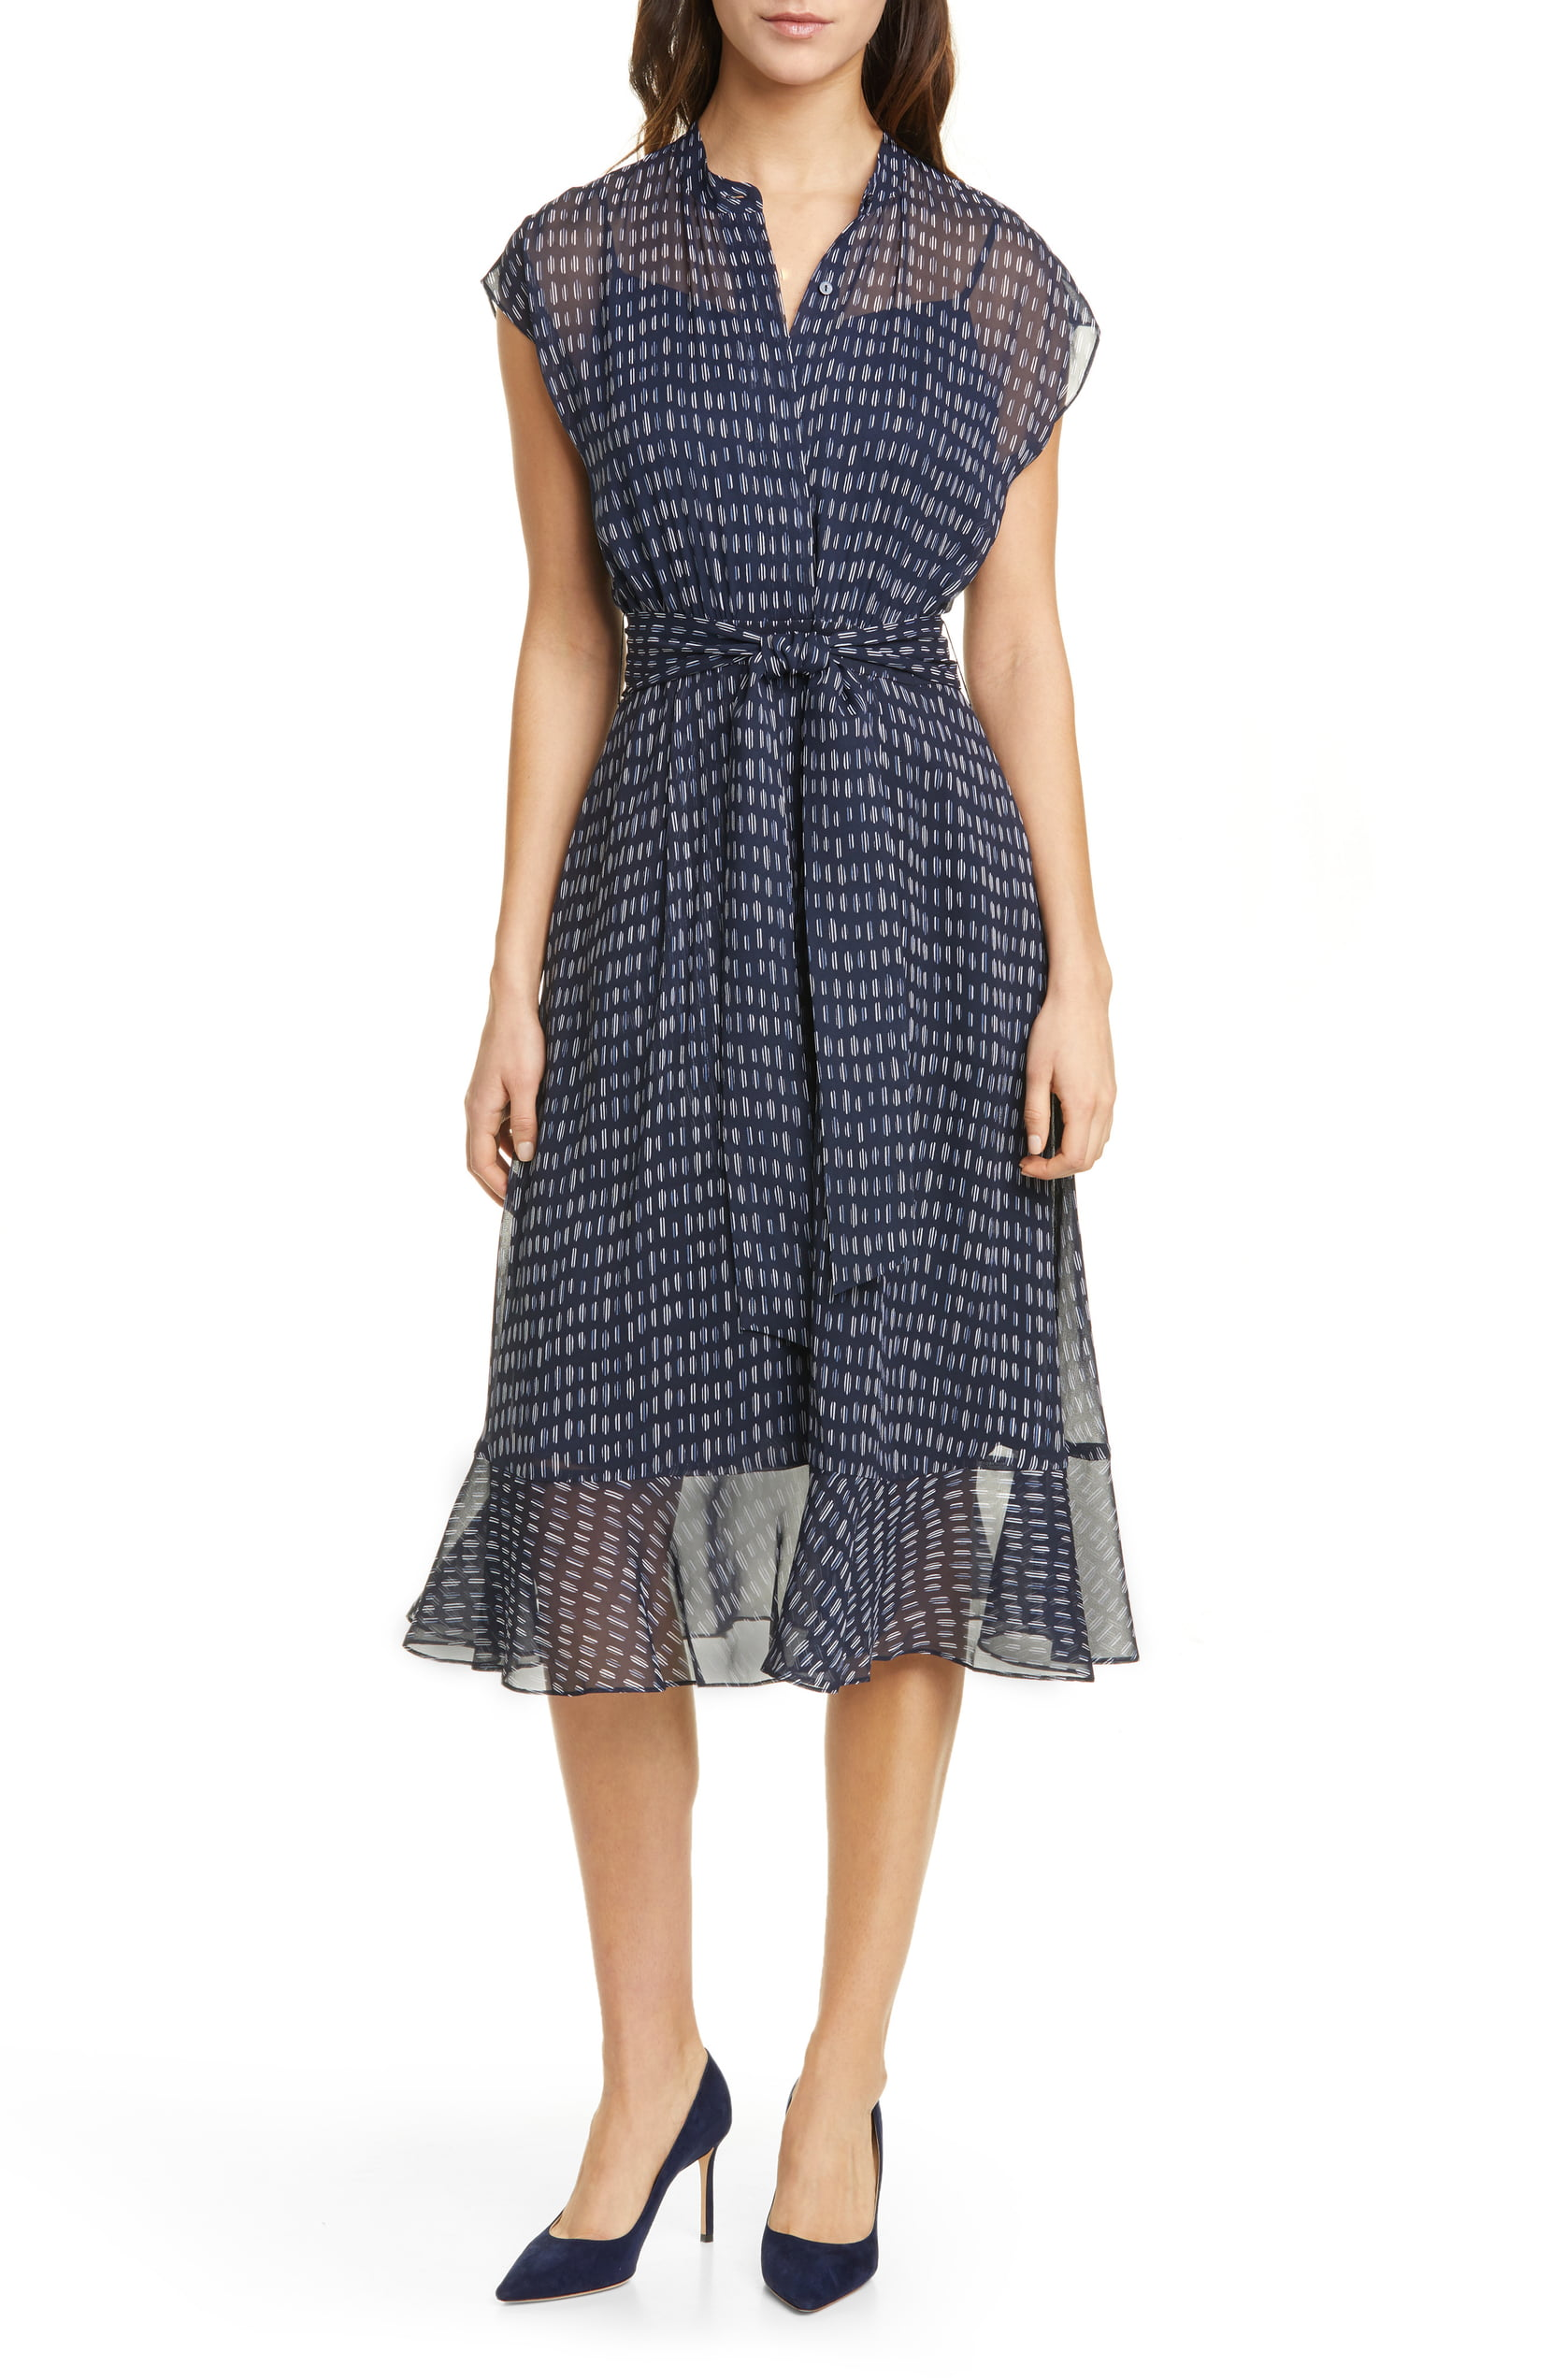 Meghan Markle Club Monaco Dress Is 50% Off At Nordstrom